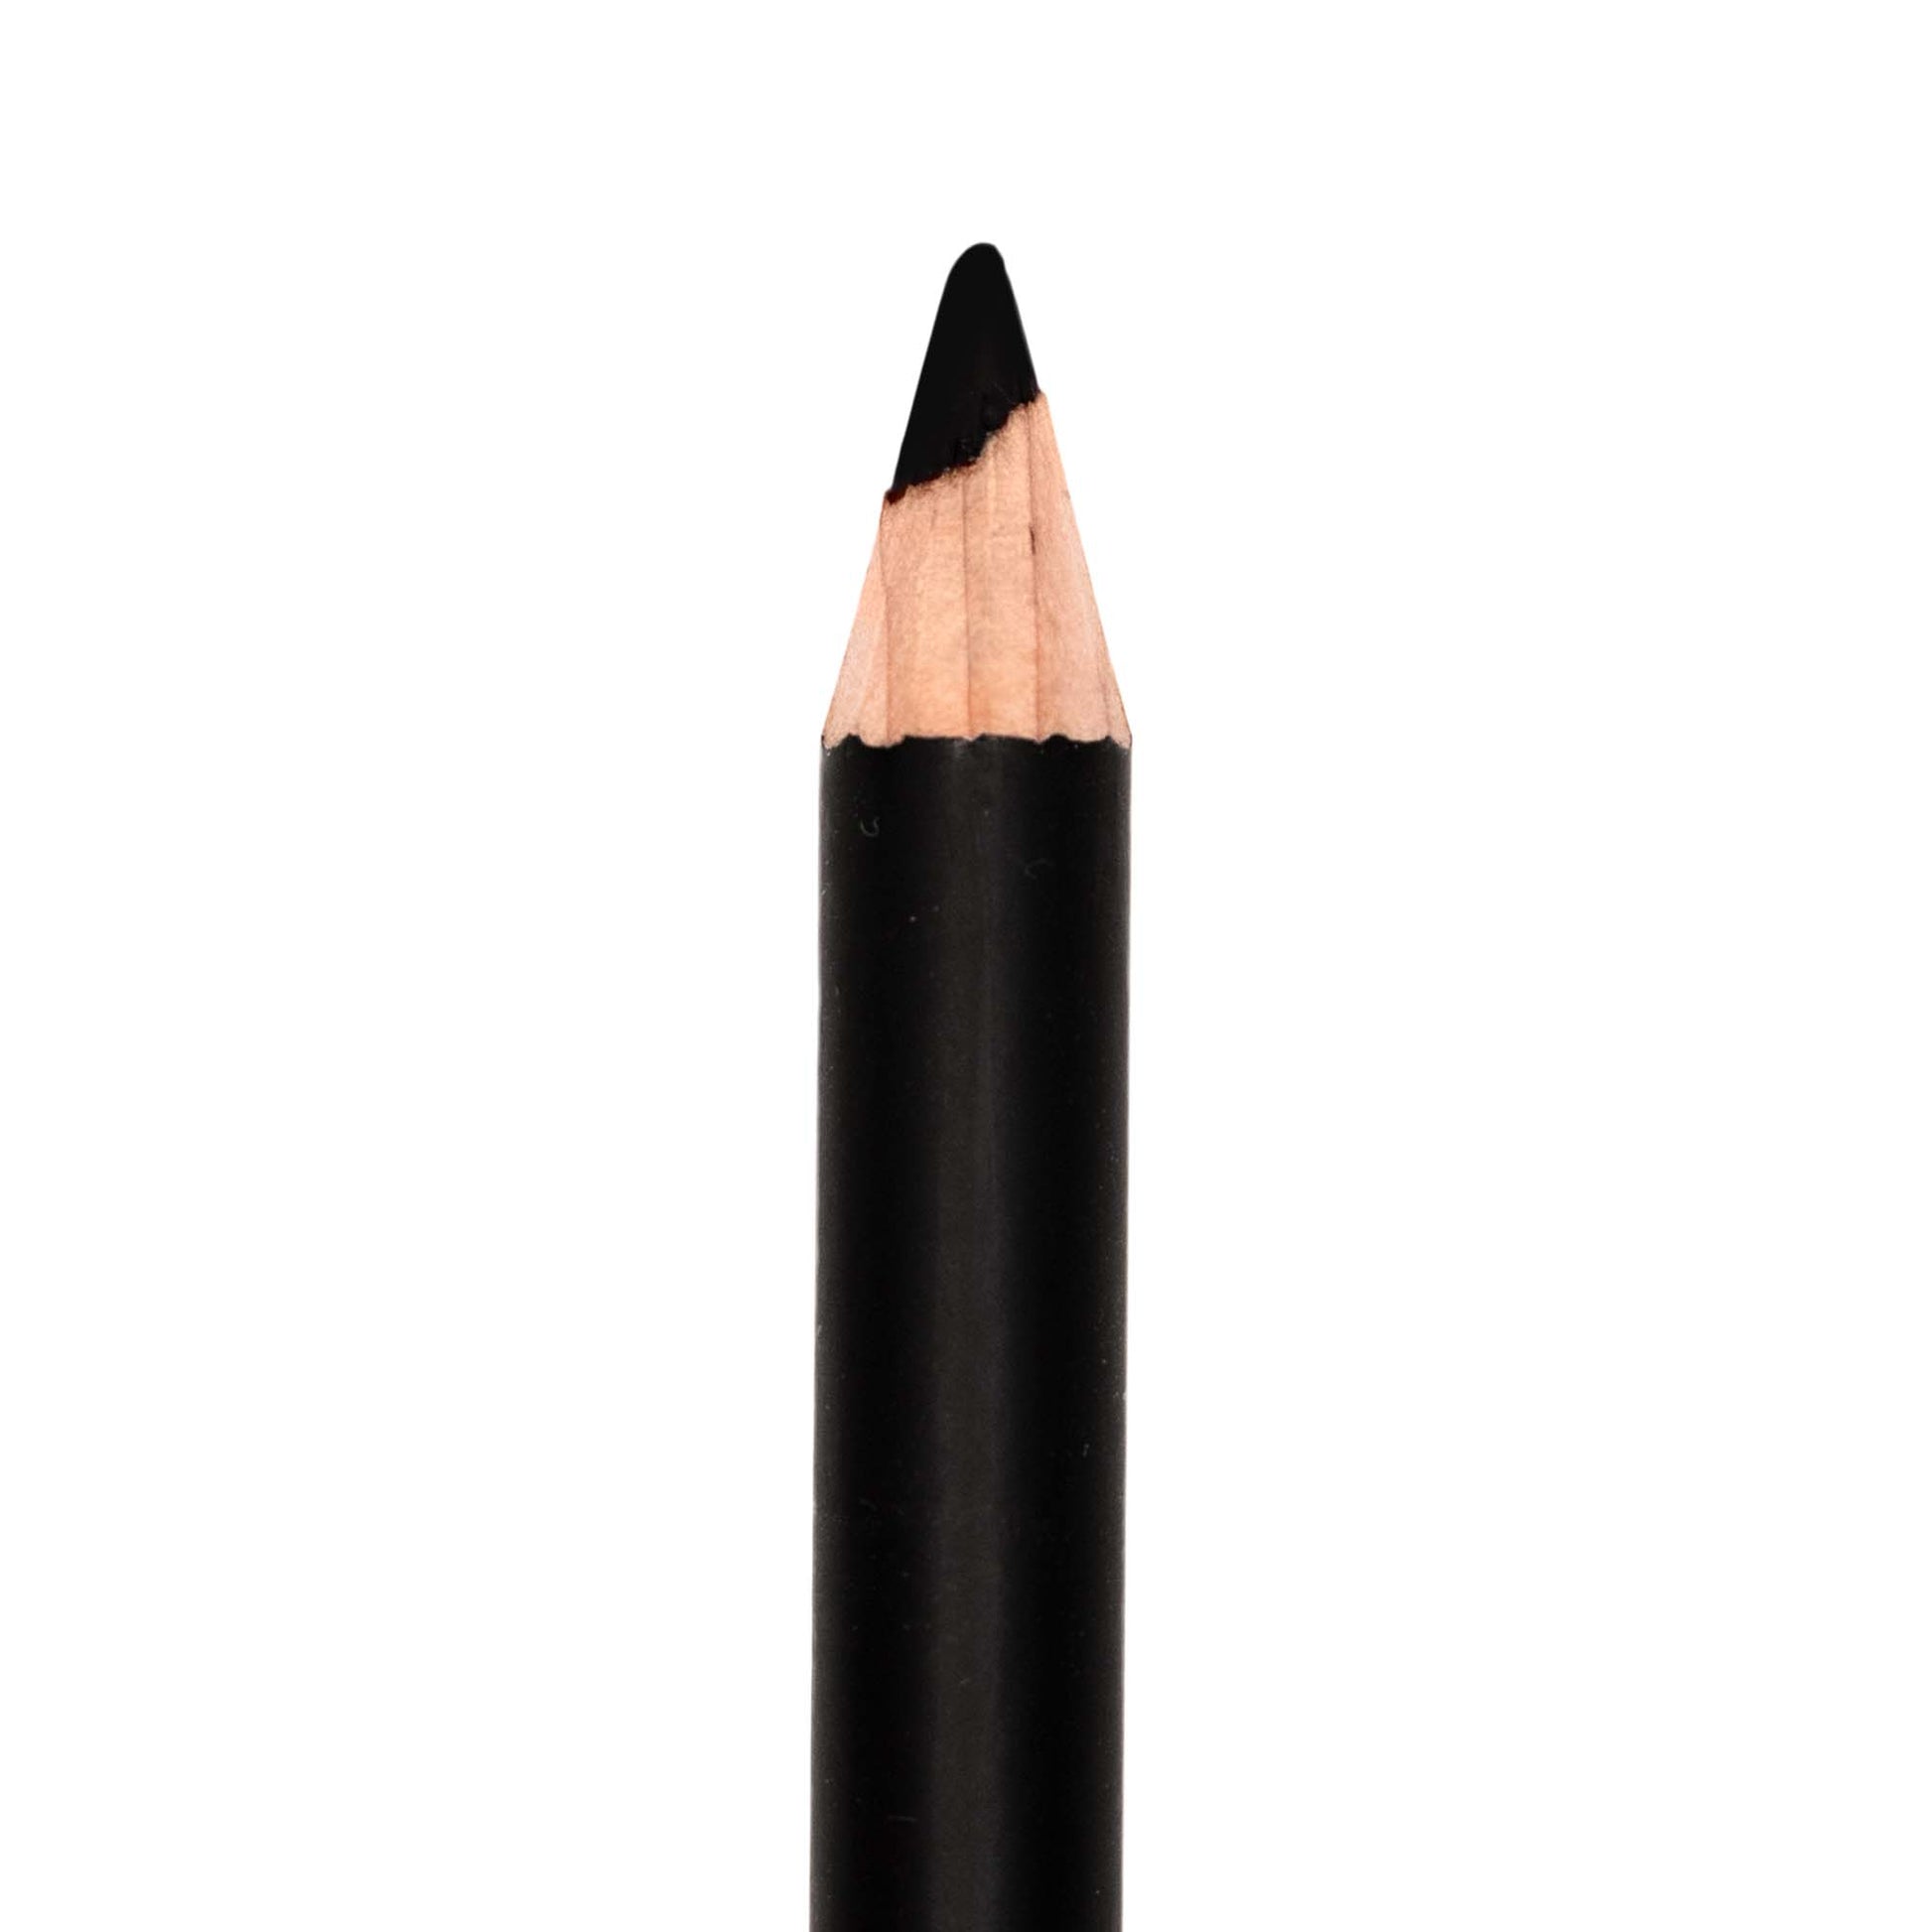 Creamy texture of Cruisin Organics Brown Eye Pencil makeup and create a glamorous, smudged eye look. Let your eyes captivate with ease and confidence, ready to make a lasting impression.